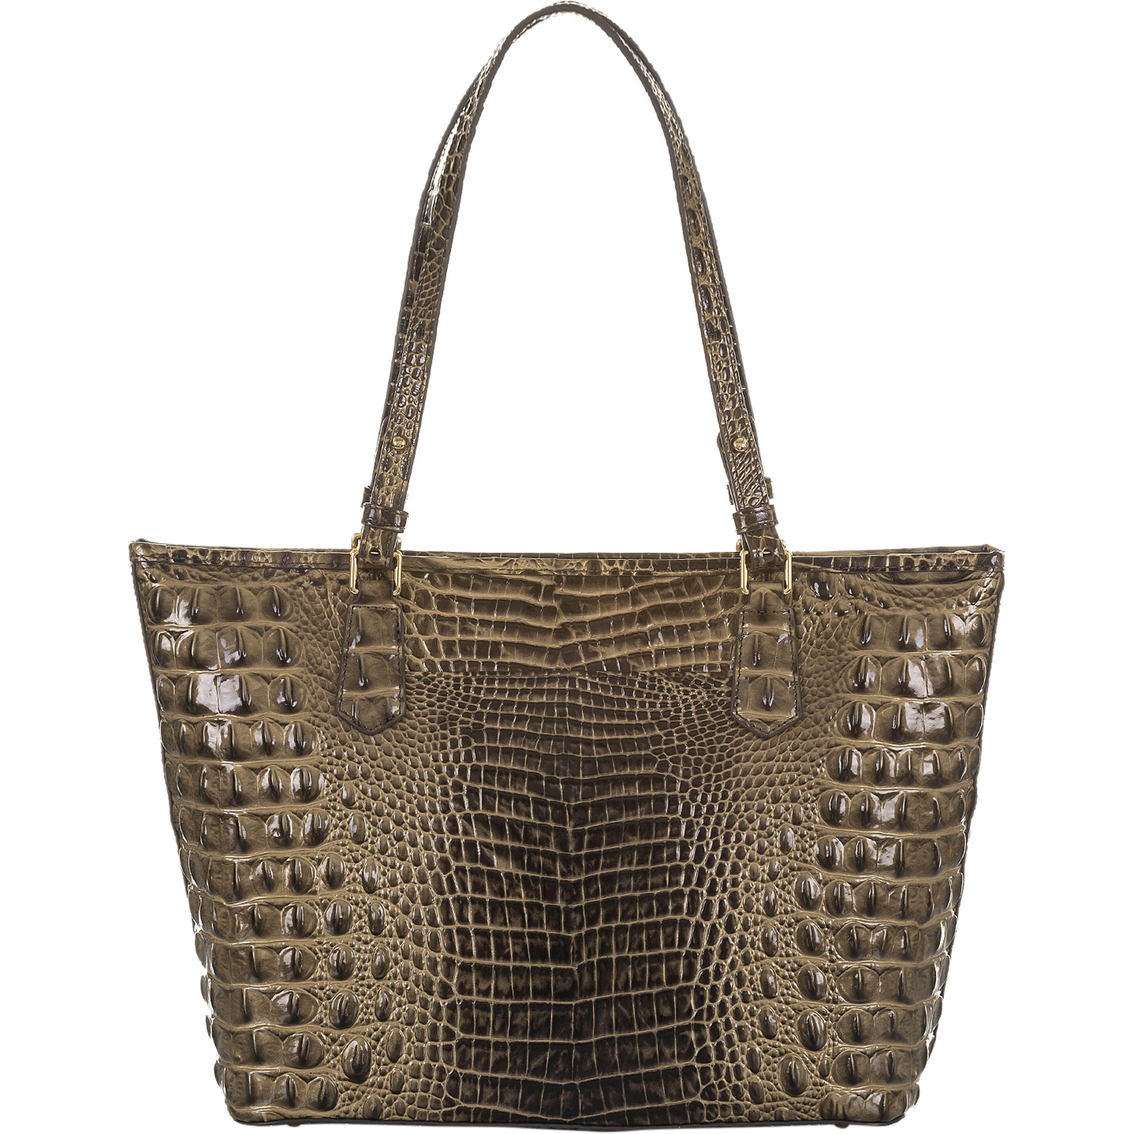 Brahmin Medium Asher Melbourne Tote | Totes & Shoppers | Clothing ...